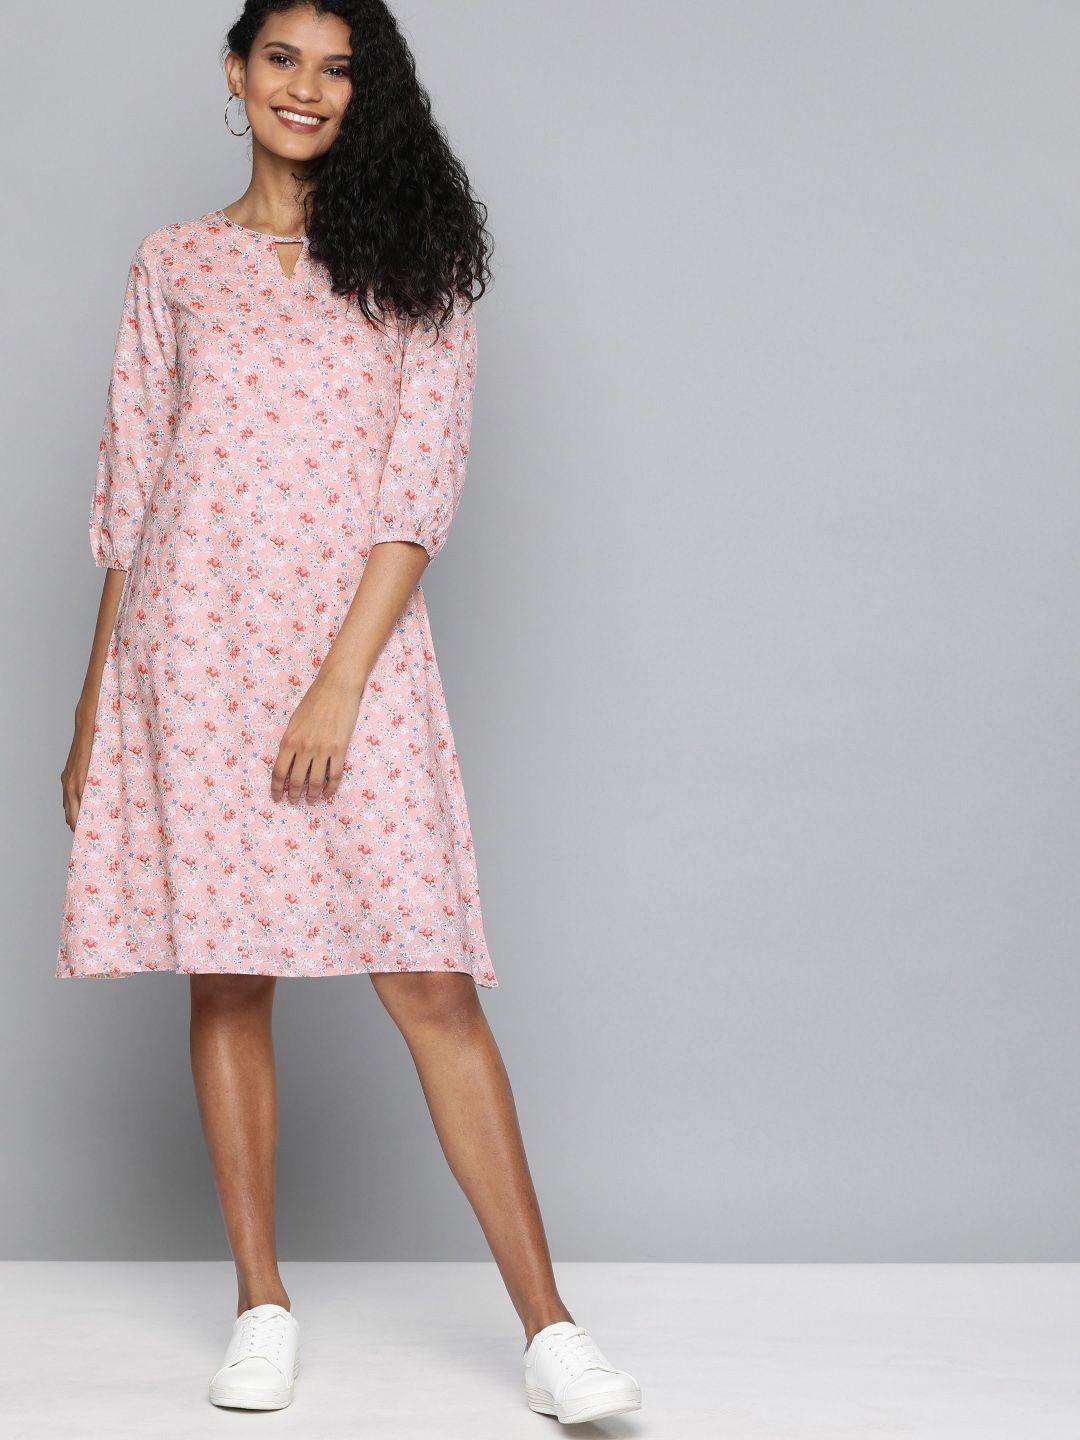 here&now women pink & white floral print a-line dress